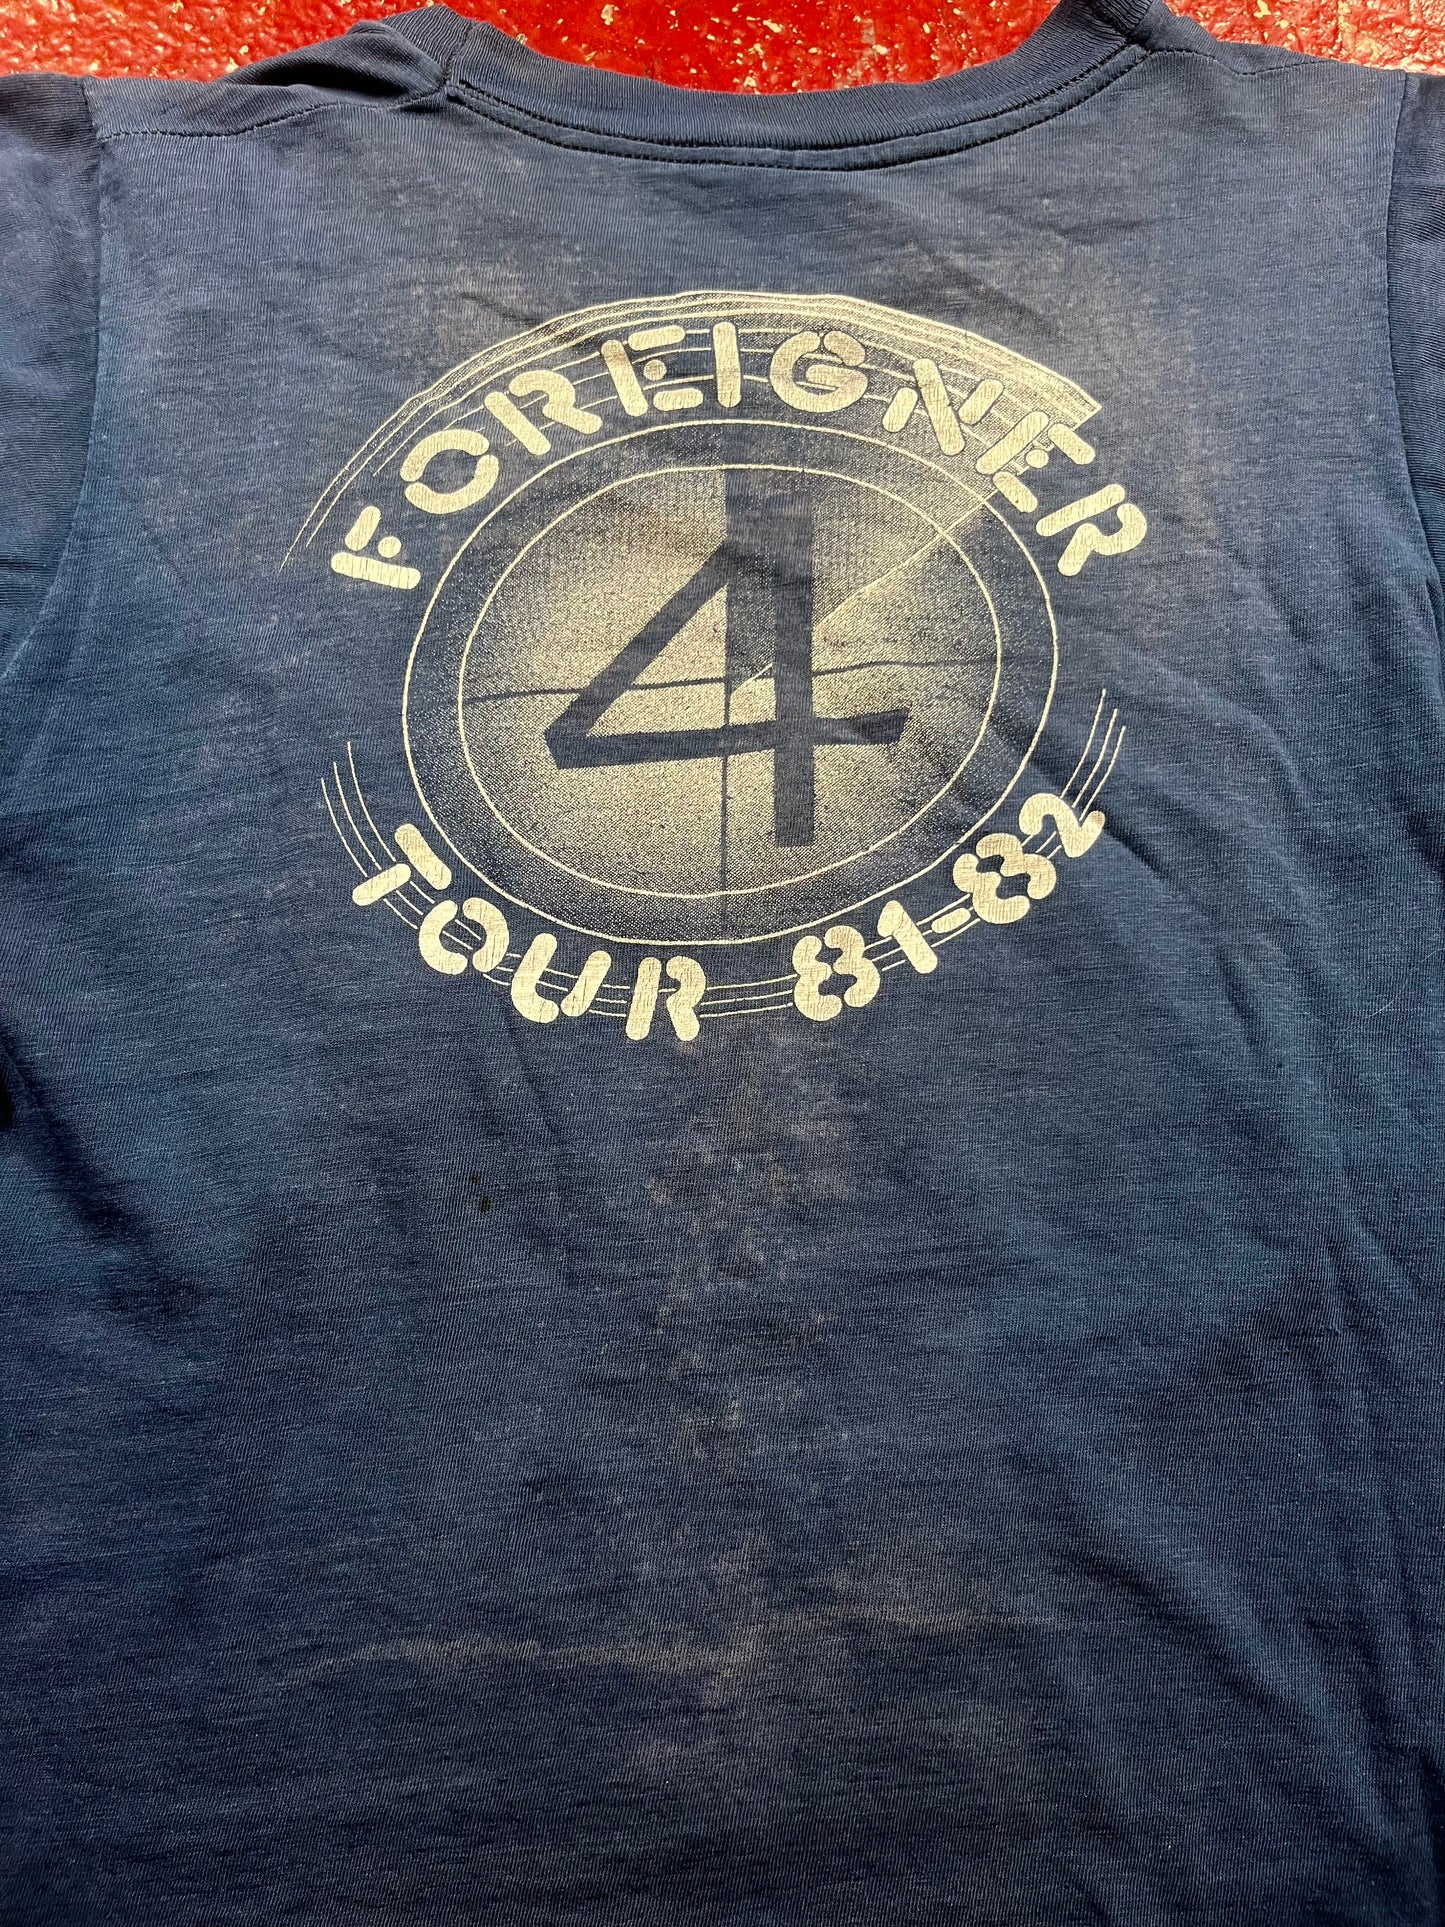 1982 Foreigner Tee